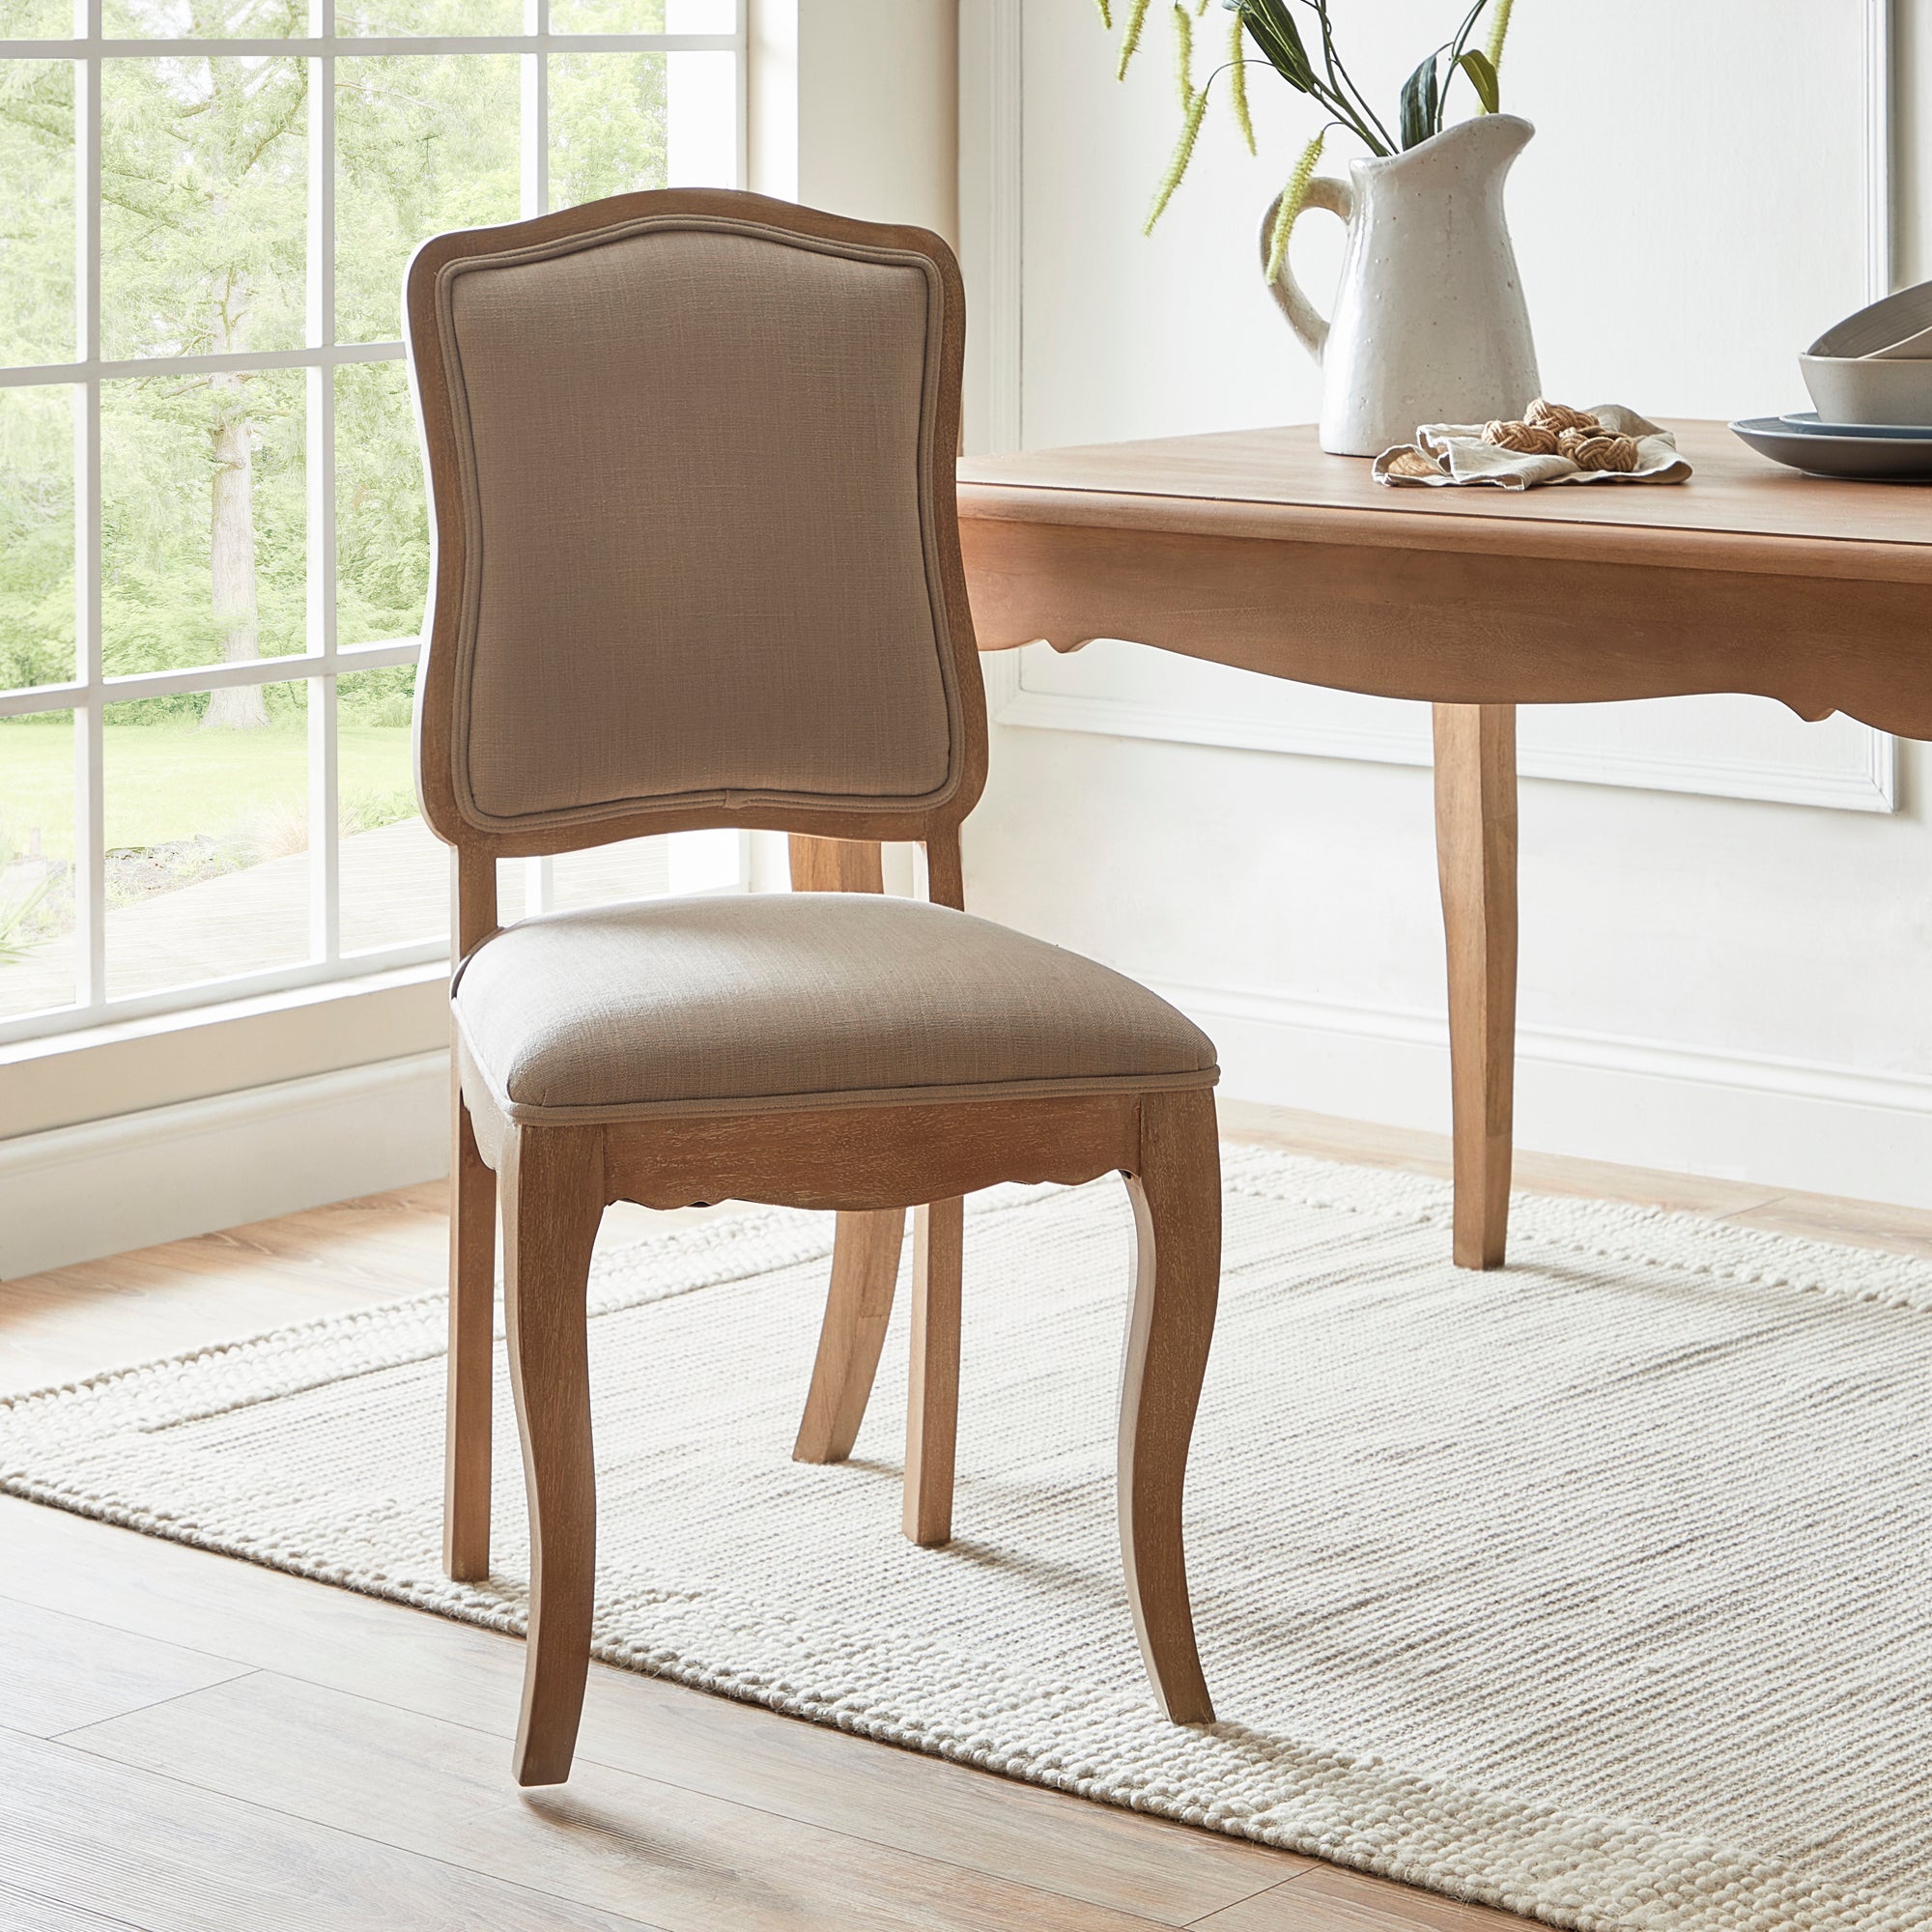 Giselle Set of 2 Dining Chairs